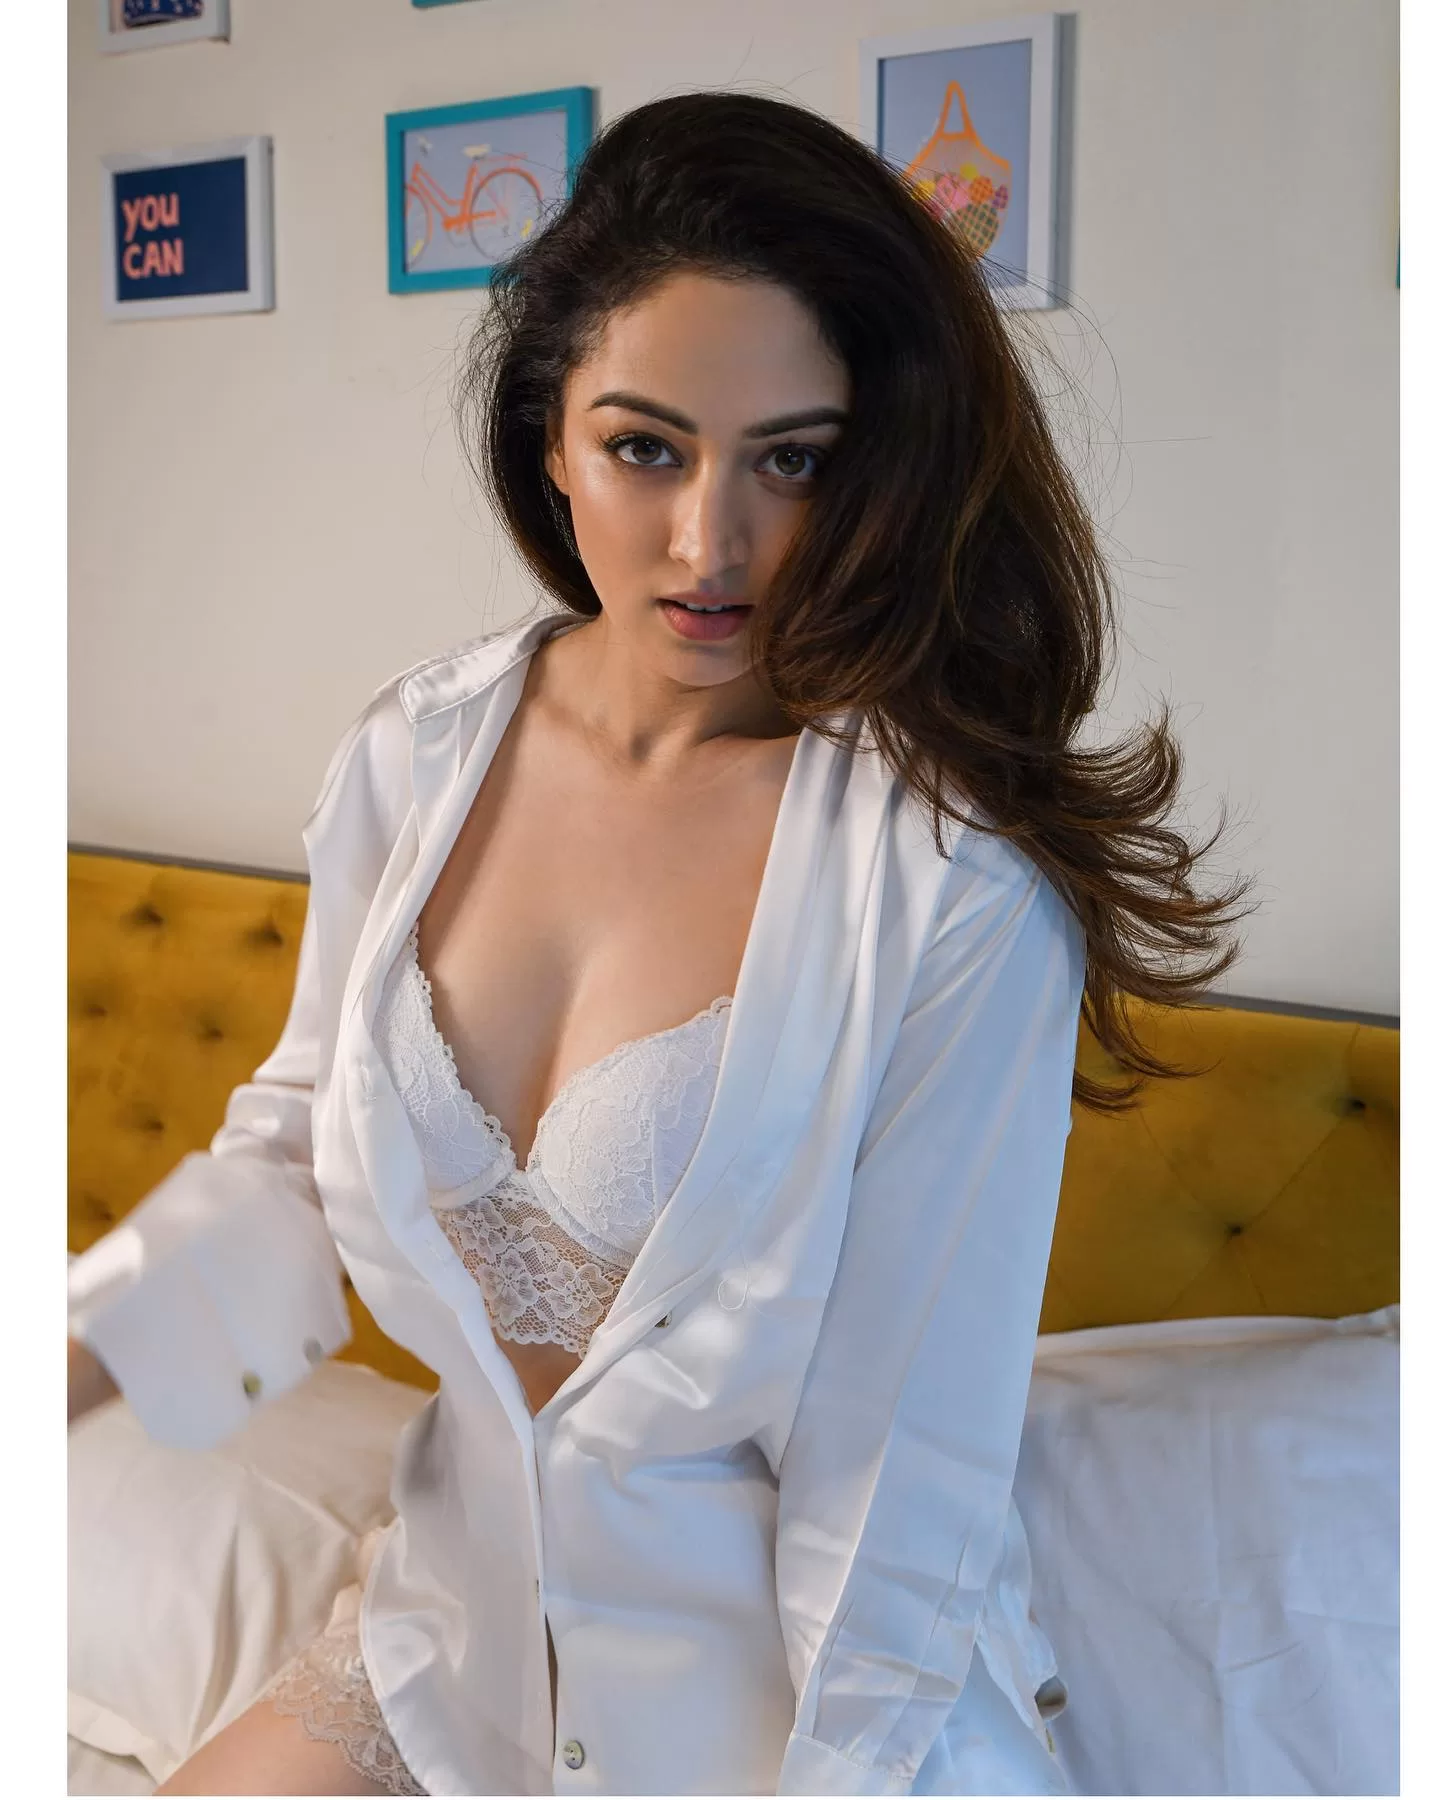 Photo shared by Sandeepa Dhar on July 28 2023 tagging @shazzalamphotography. May be an image of 1 person makeup sleepwear bath robe chemise bedroom and text that says you CAN jpg